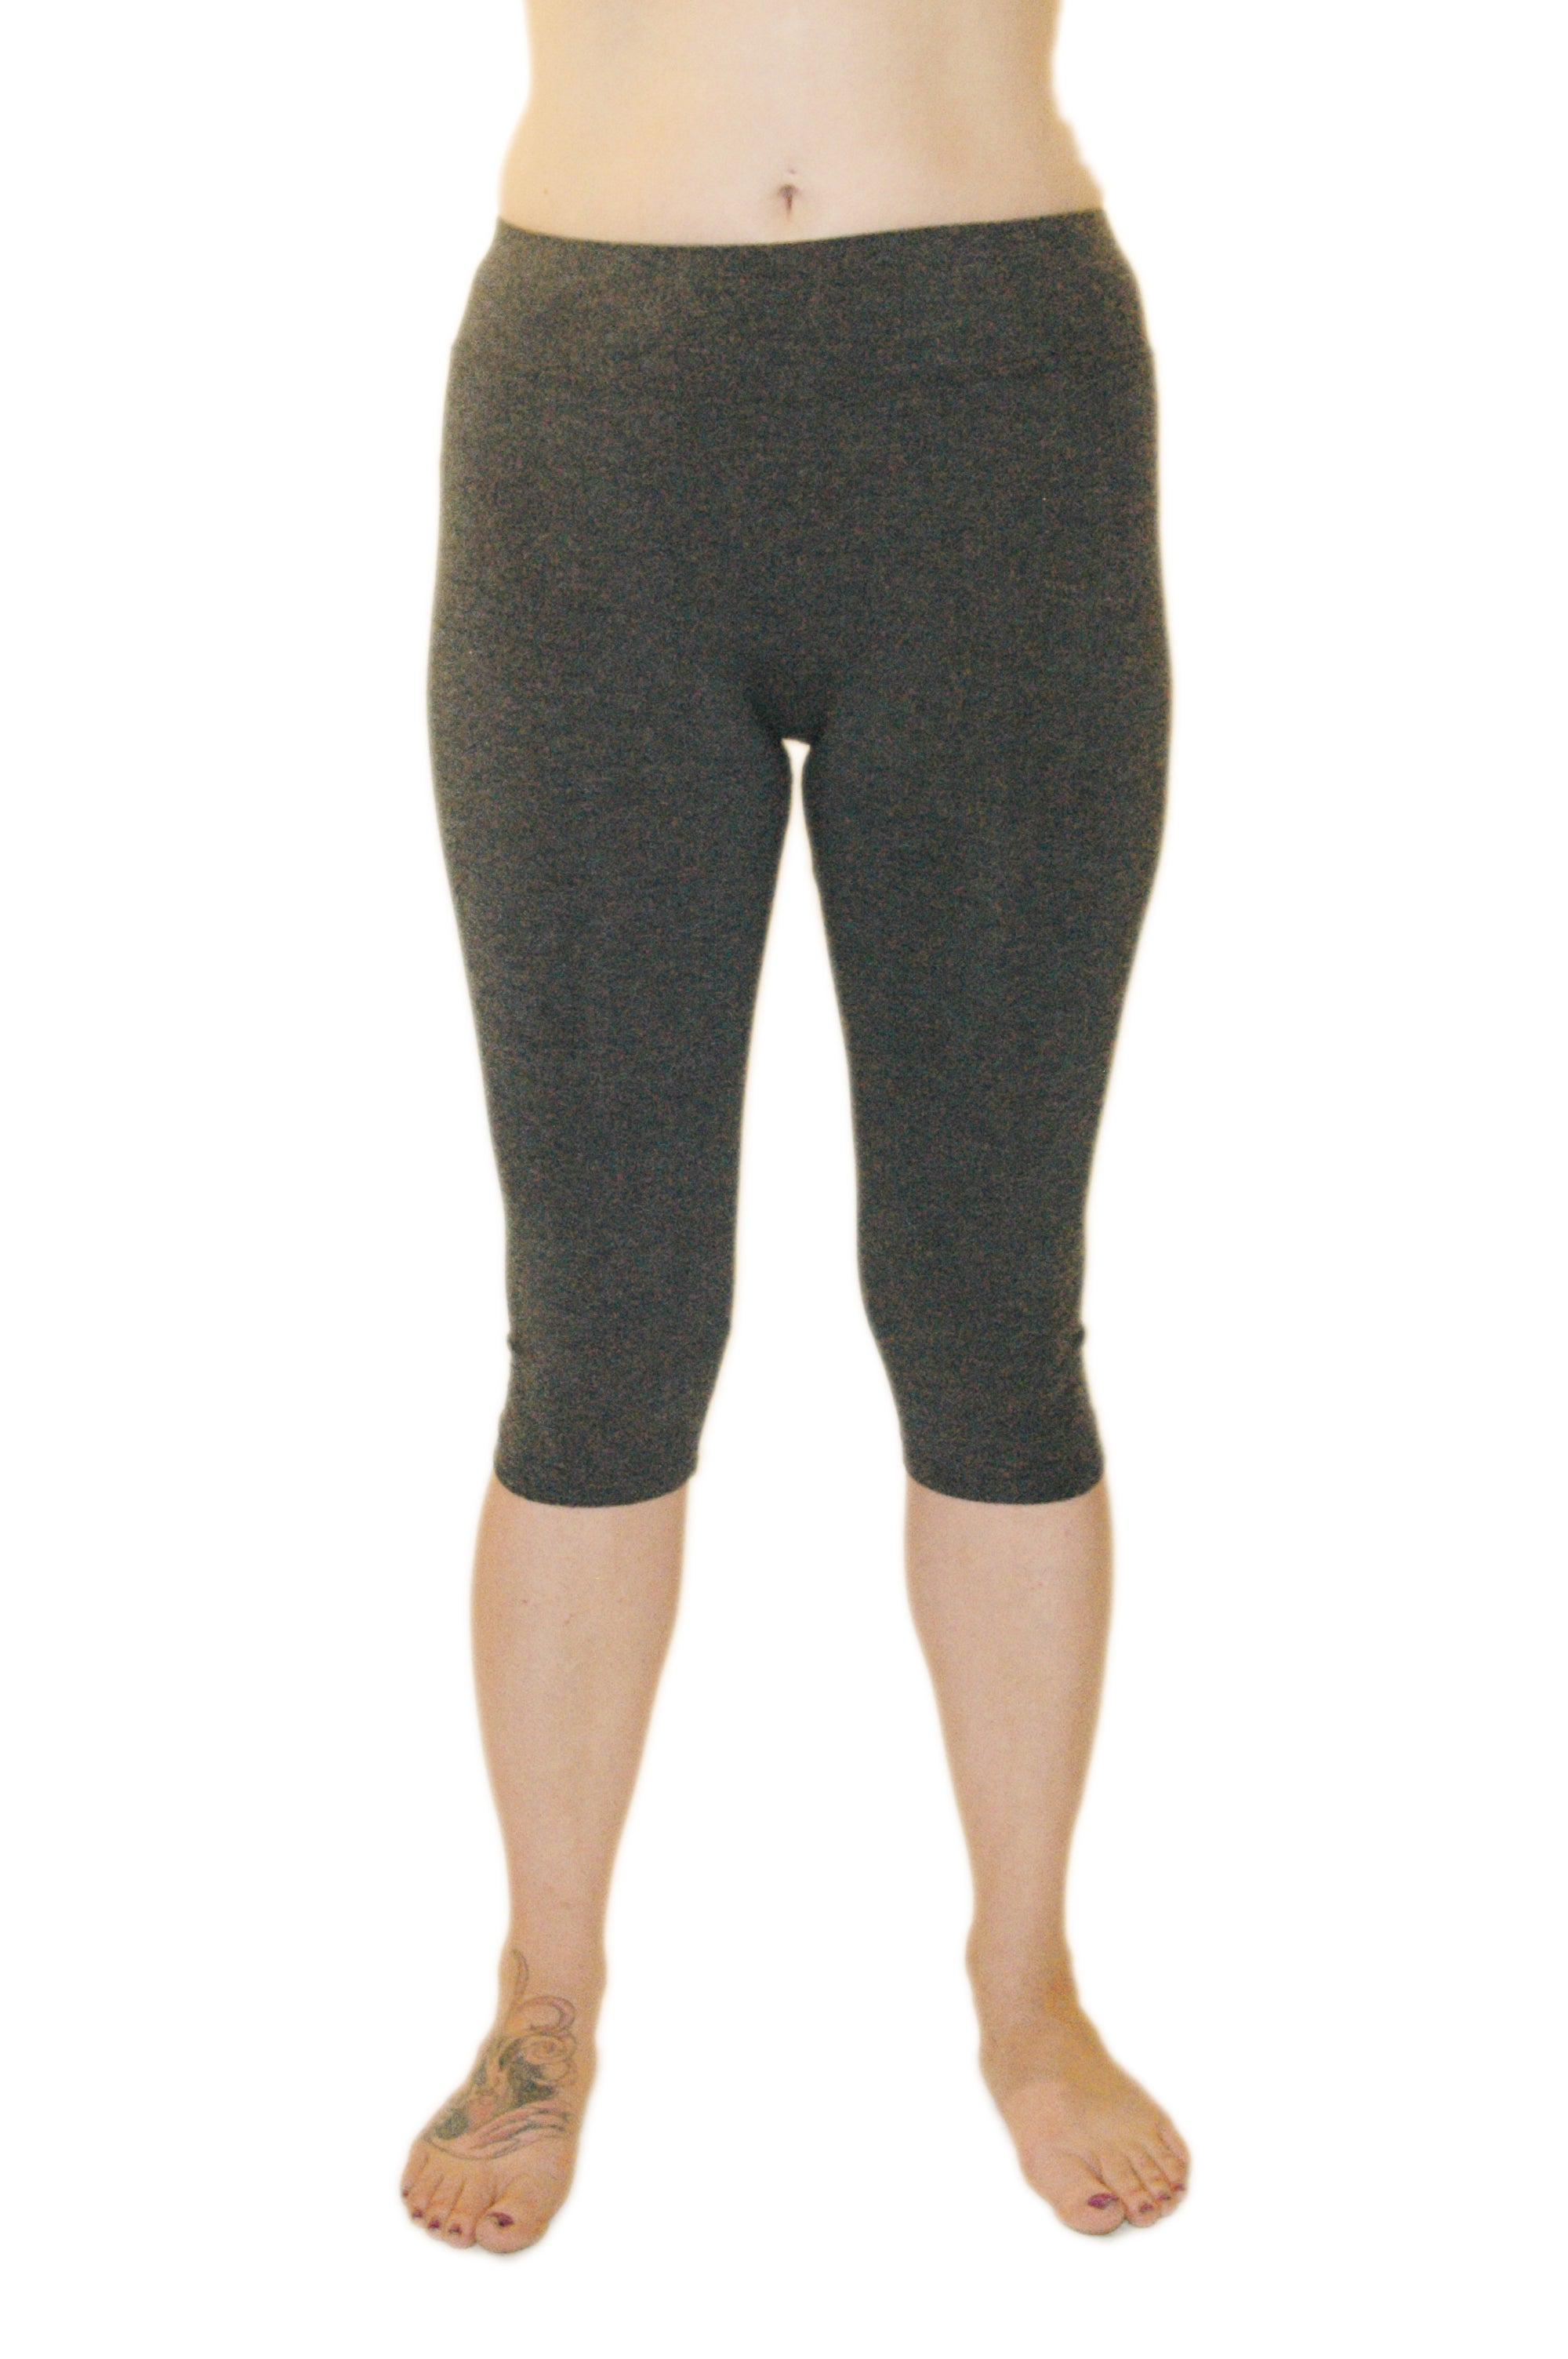 Capri Leggings in Bamboo/cotton/spandex Jersey With 4 Way Stretch